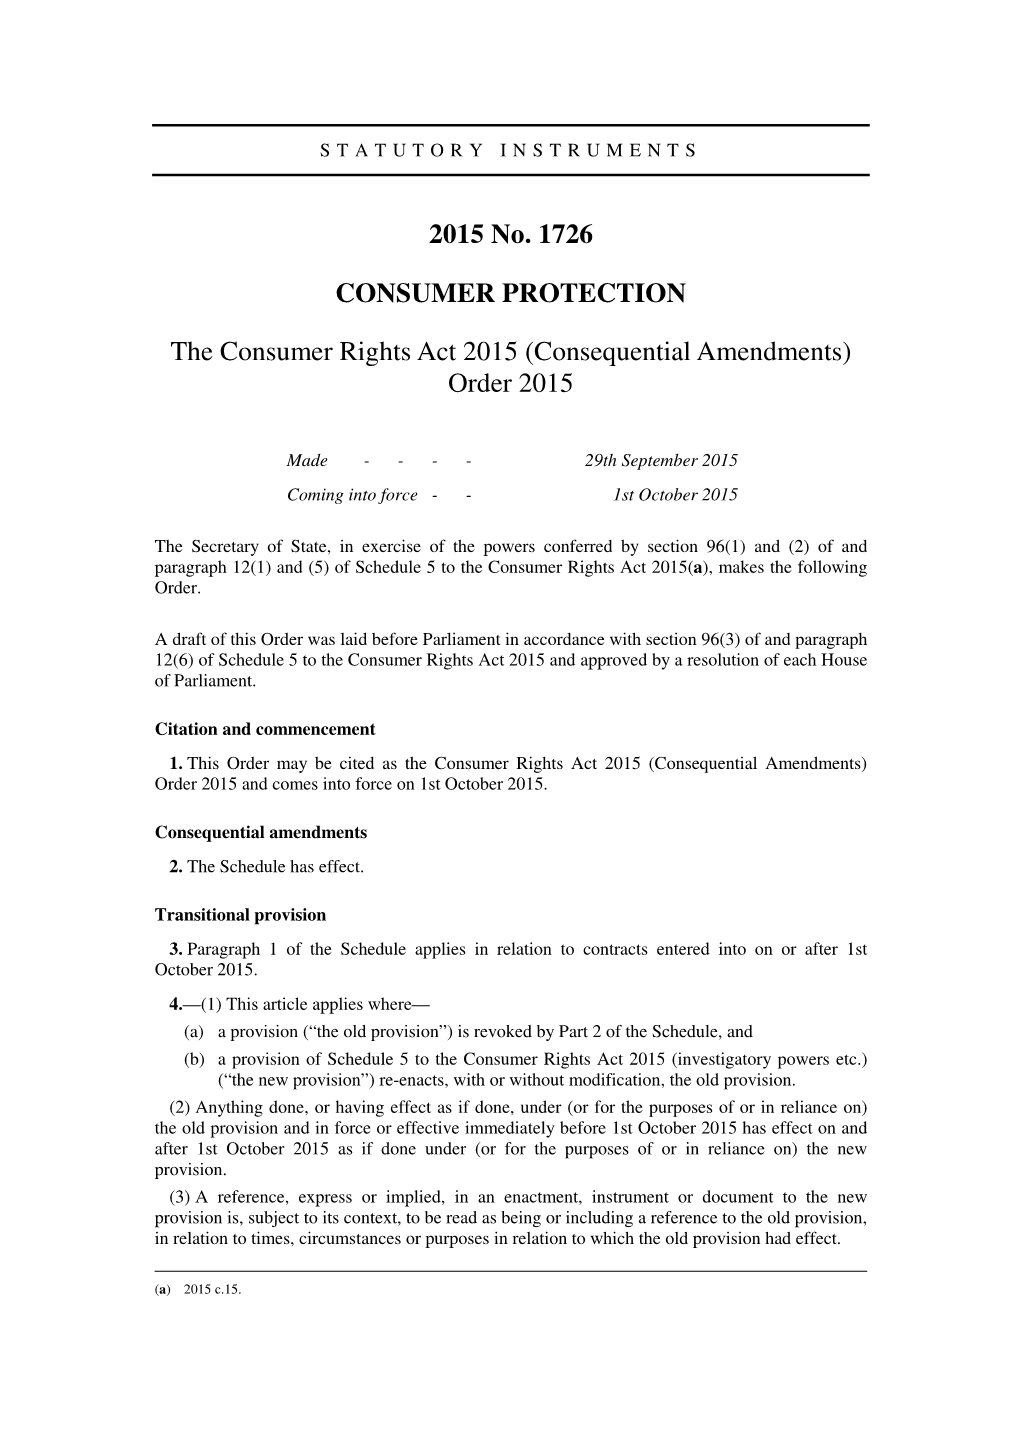 The Consumer Rights Act 2015 (Consequential Amendments) Order 2015